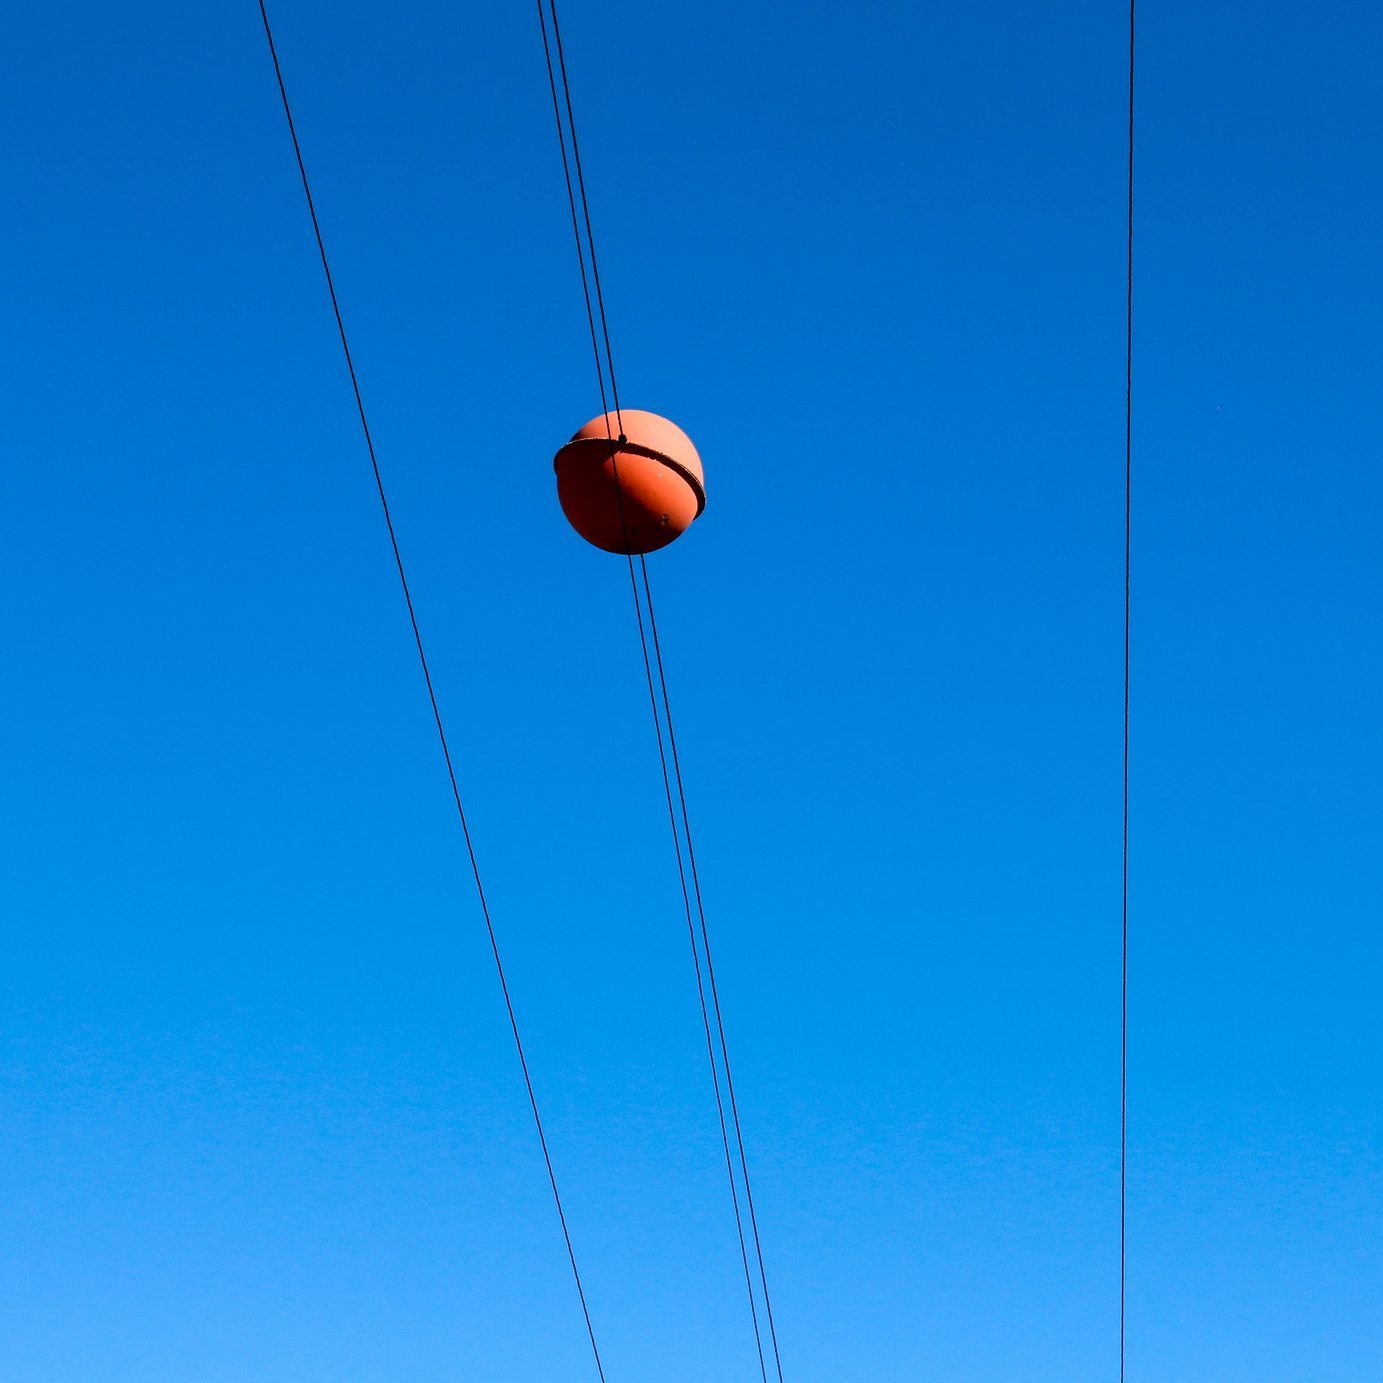 Red Power Line Caution Sphere